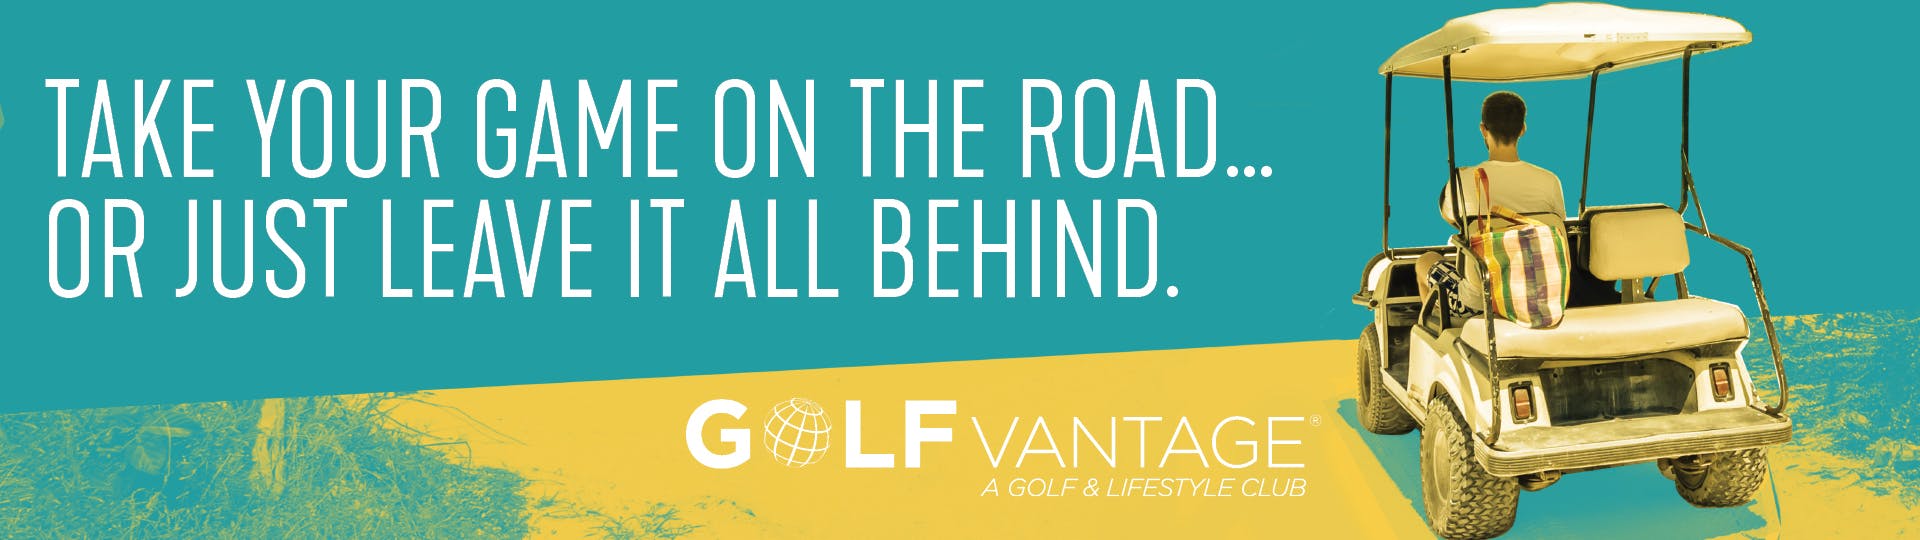 Guy in a golf cart heading away from the camera. "Take your game on the road...or just leave it all behind." GOLFvantage logo.